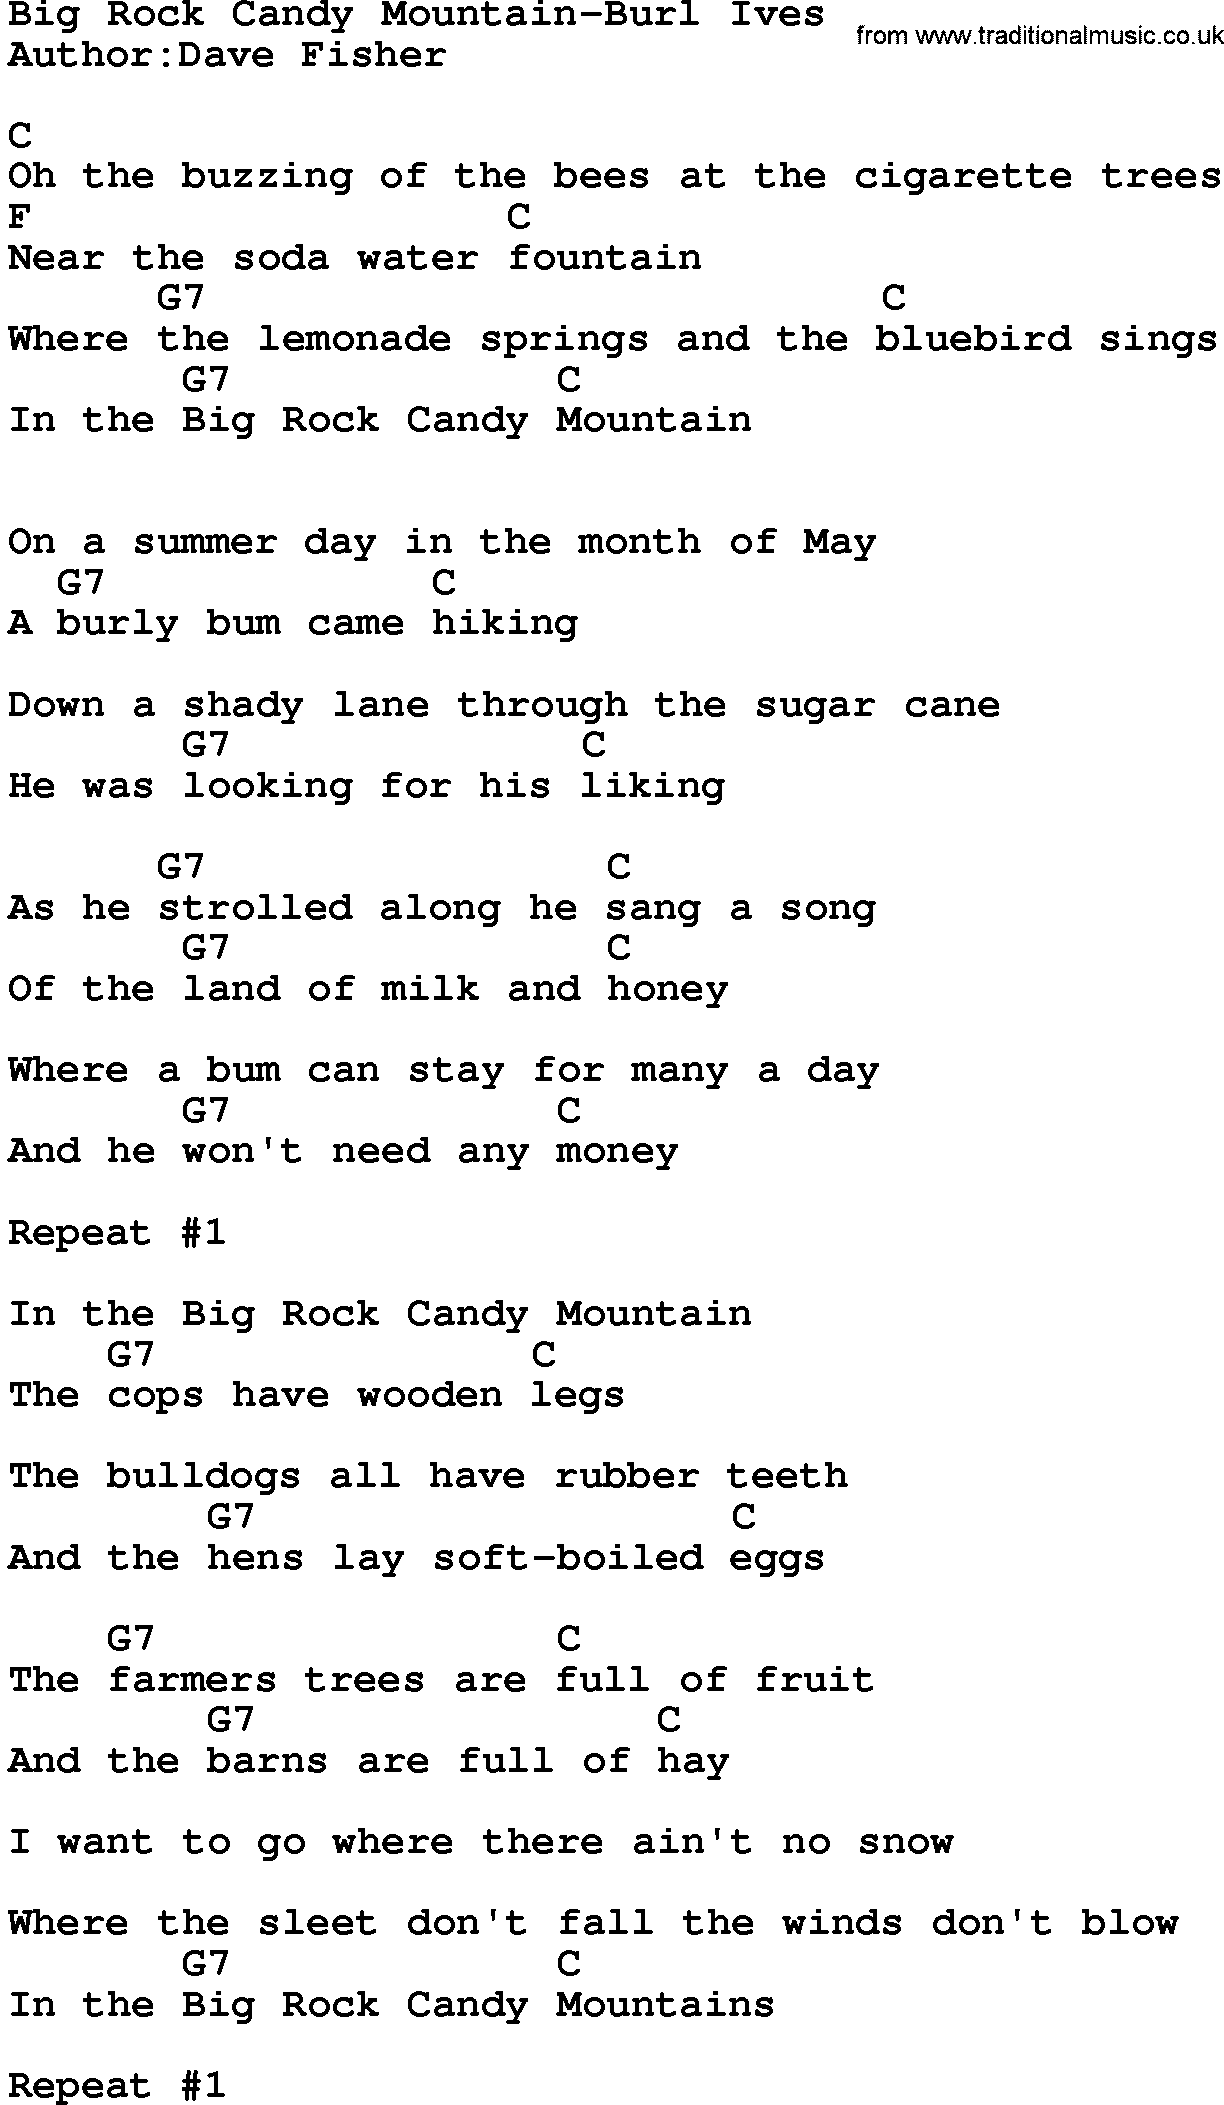 Country music song: Big Rock Candy Mountain-Burl Ives lyrics and chords